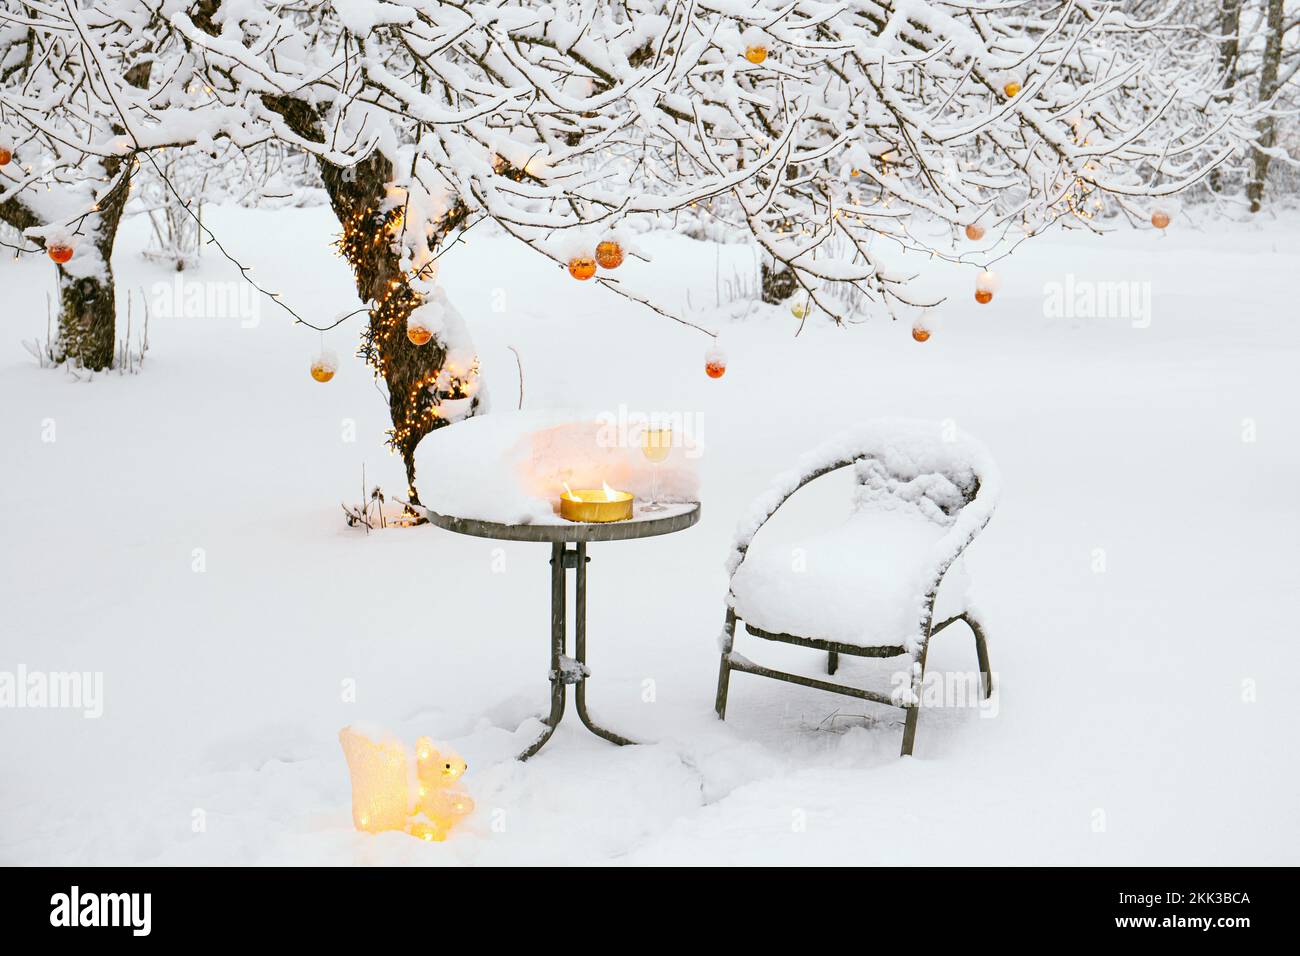 Snow covering apple tree in home garden in winter, decorated with lot of copper metallic Christmas baubles and warm white string led lights. Stock Photo